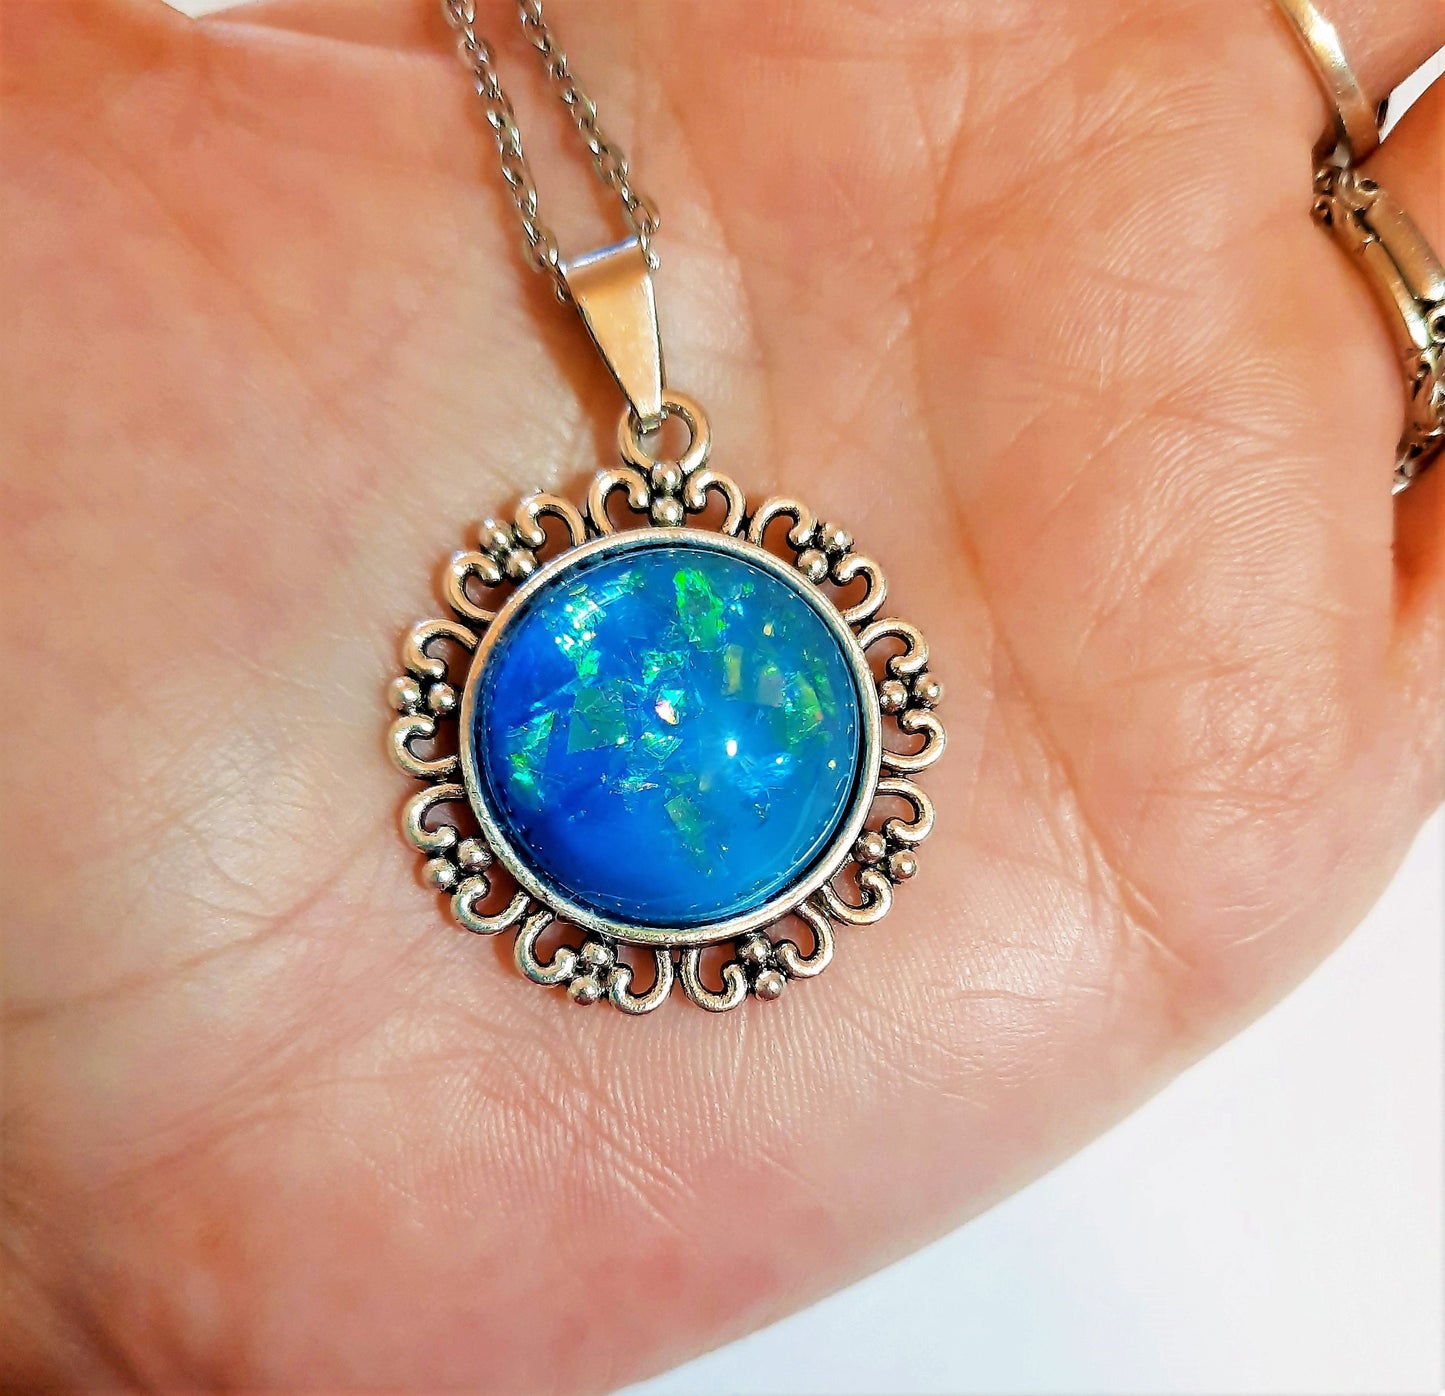 Translucent Glittery Blue Tibetan Style Pendant Necklace - Stainless Steel - Hypoallergenic - Glass Cabochon